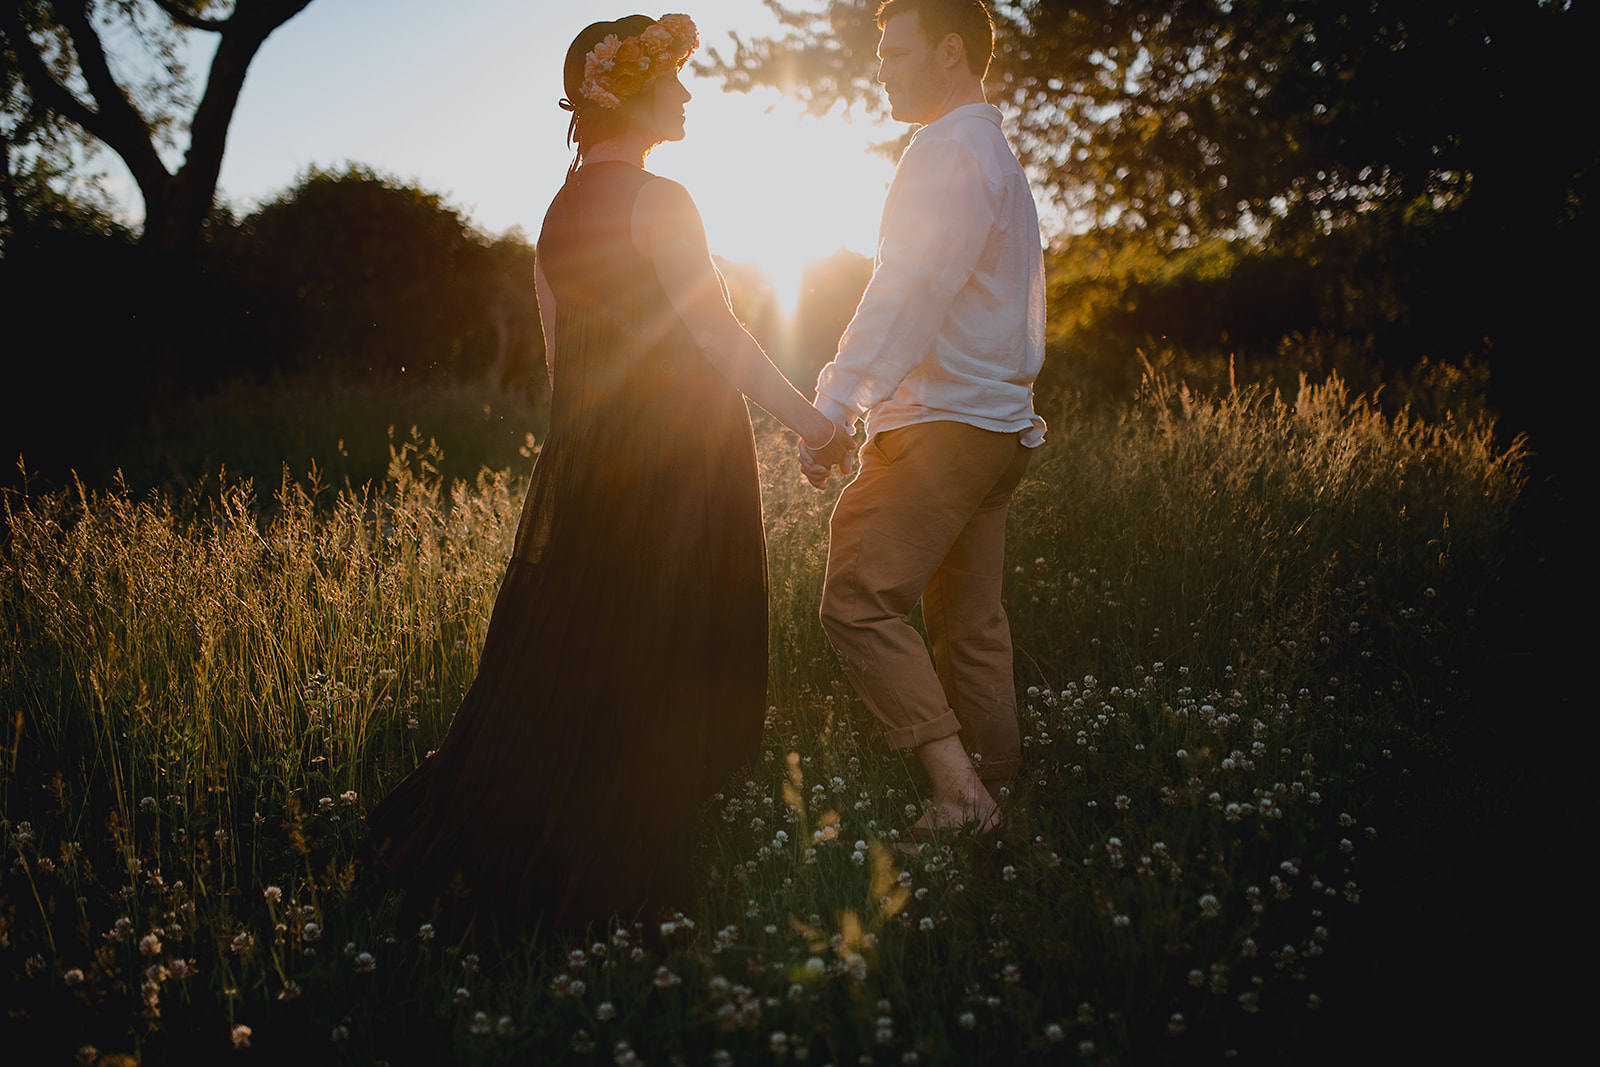 Silhouettes of newlyweds at dusk in a wildflower field, radiating romance and tranquility.